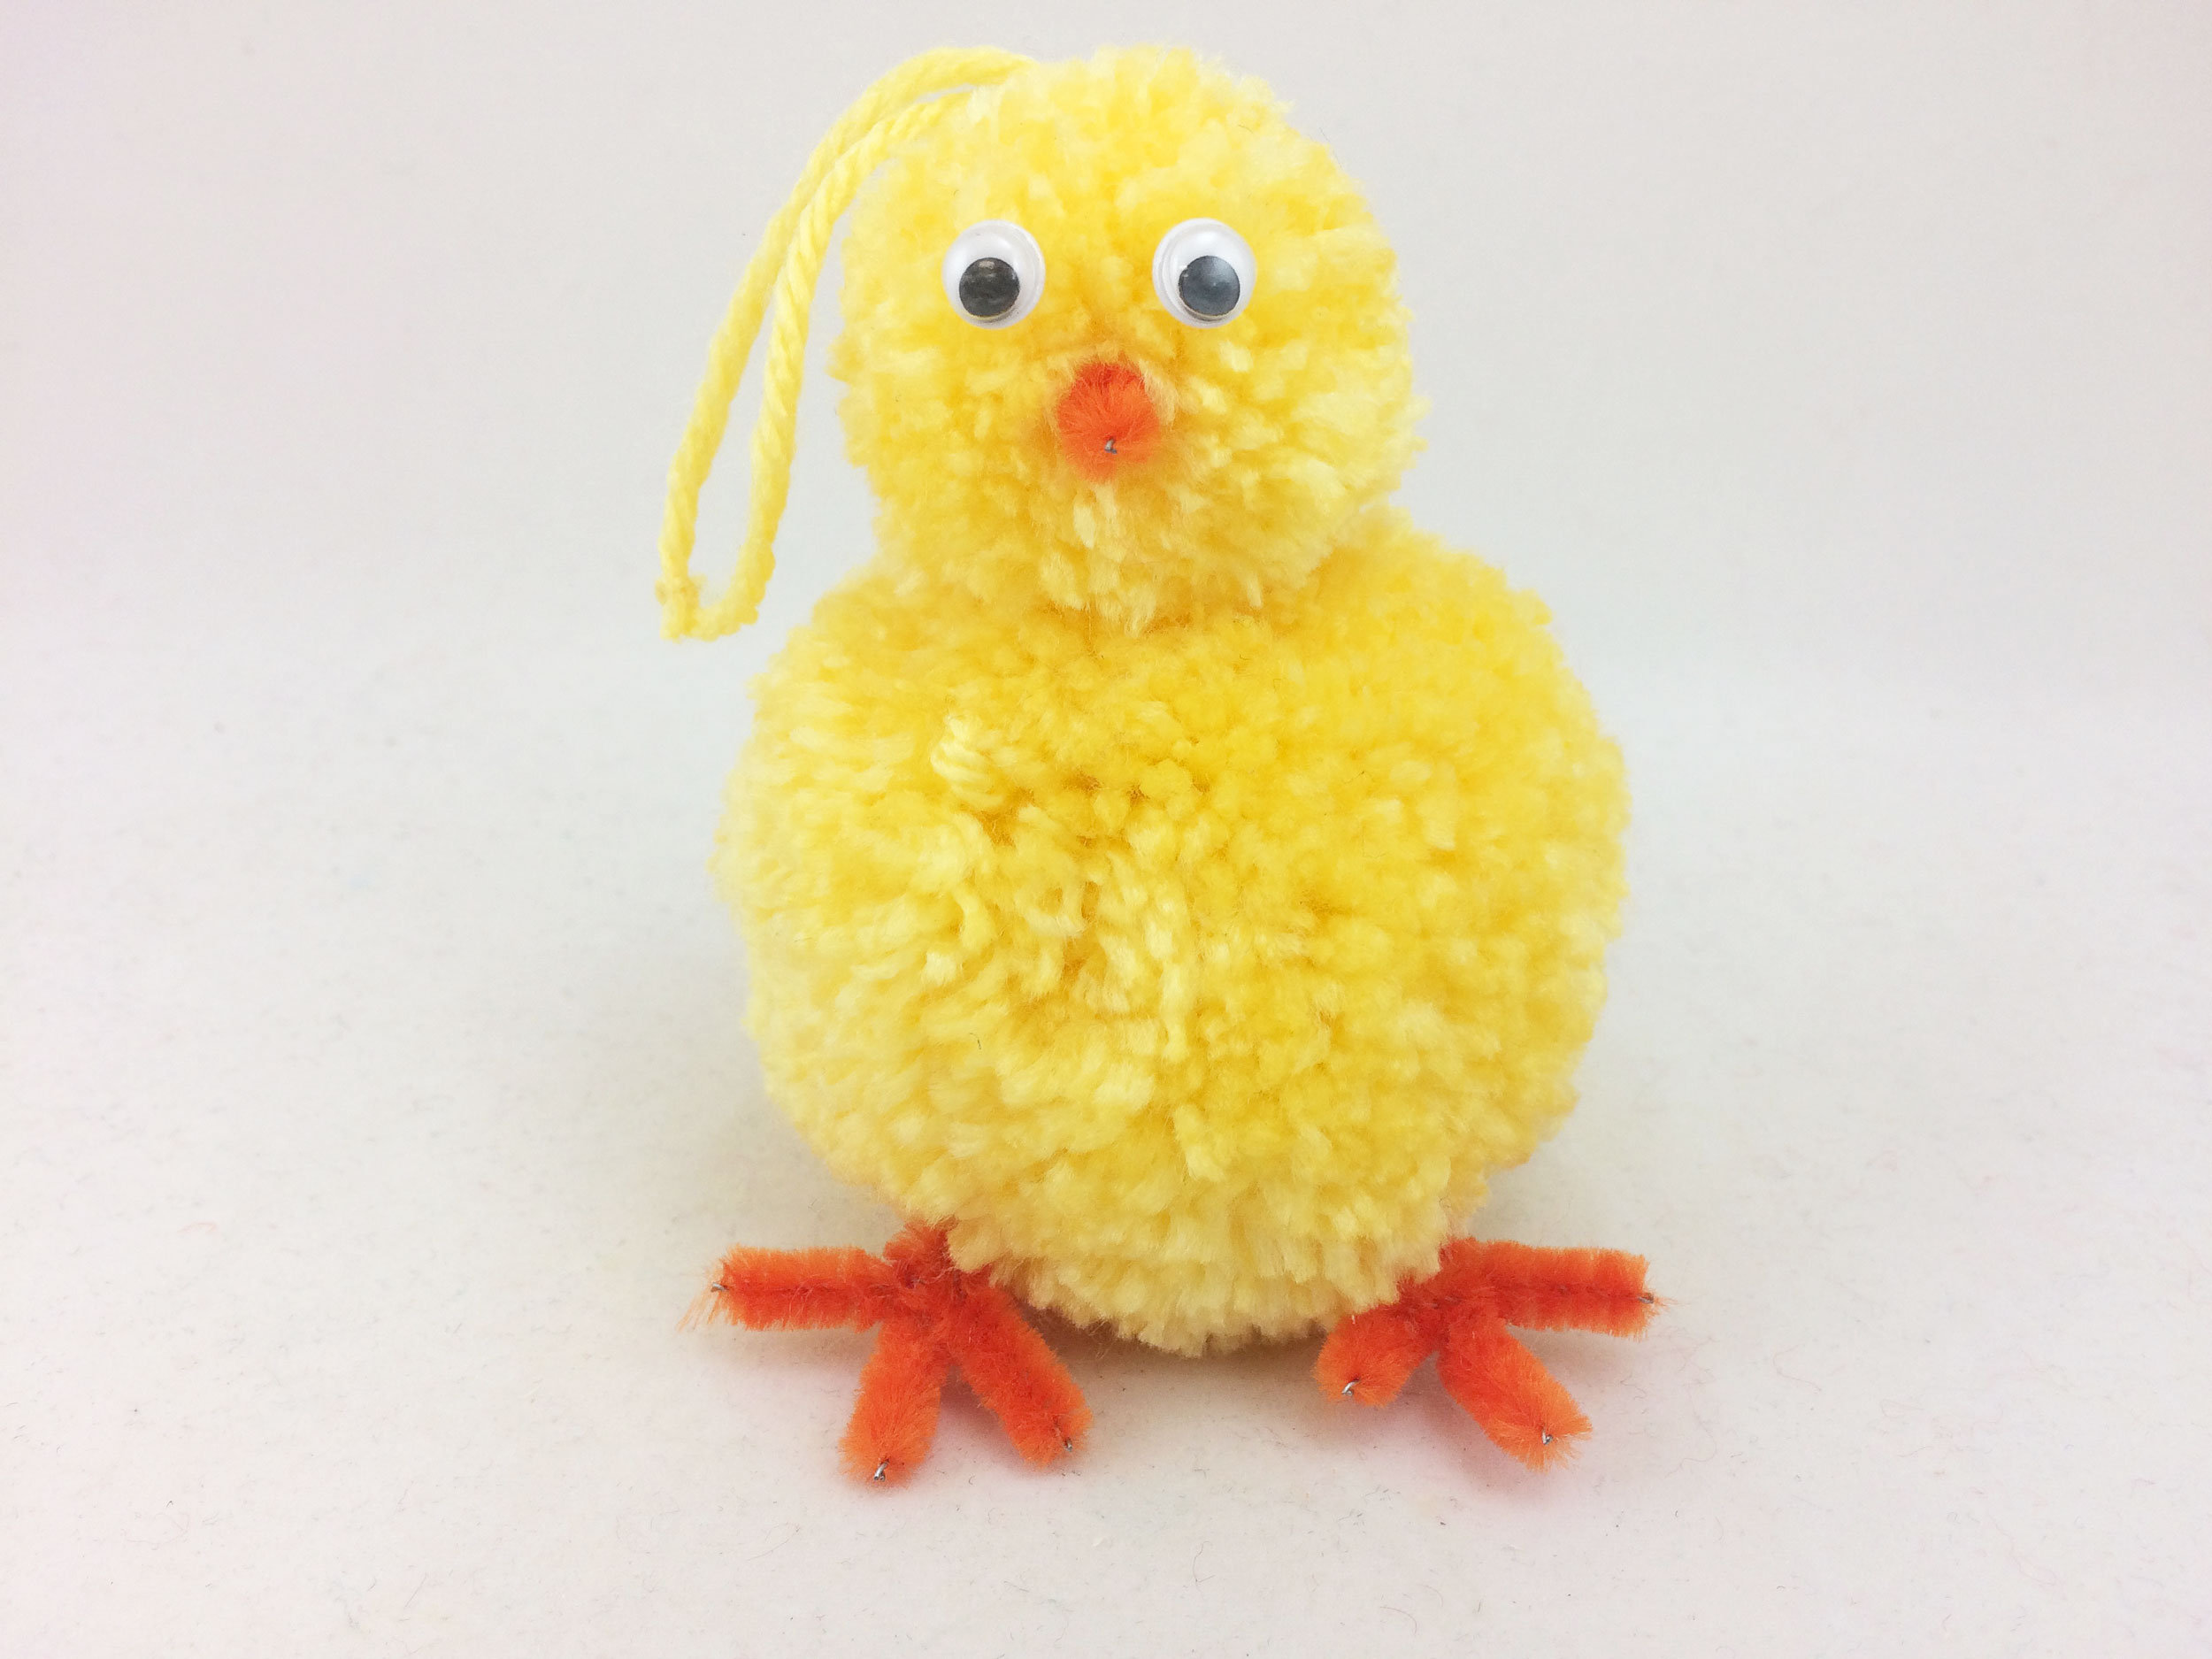 Completed DIY Easter Chick decoration with ornament loop. | OrnamentShop.com